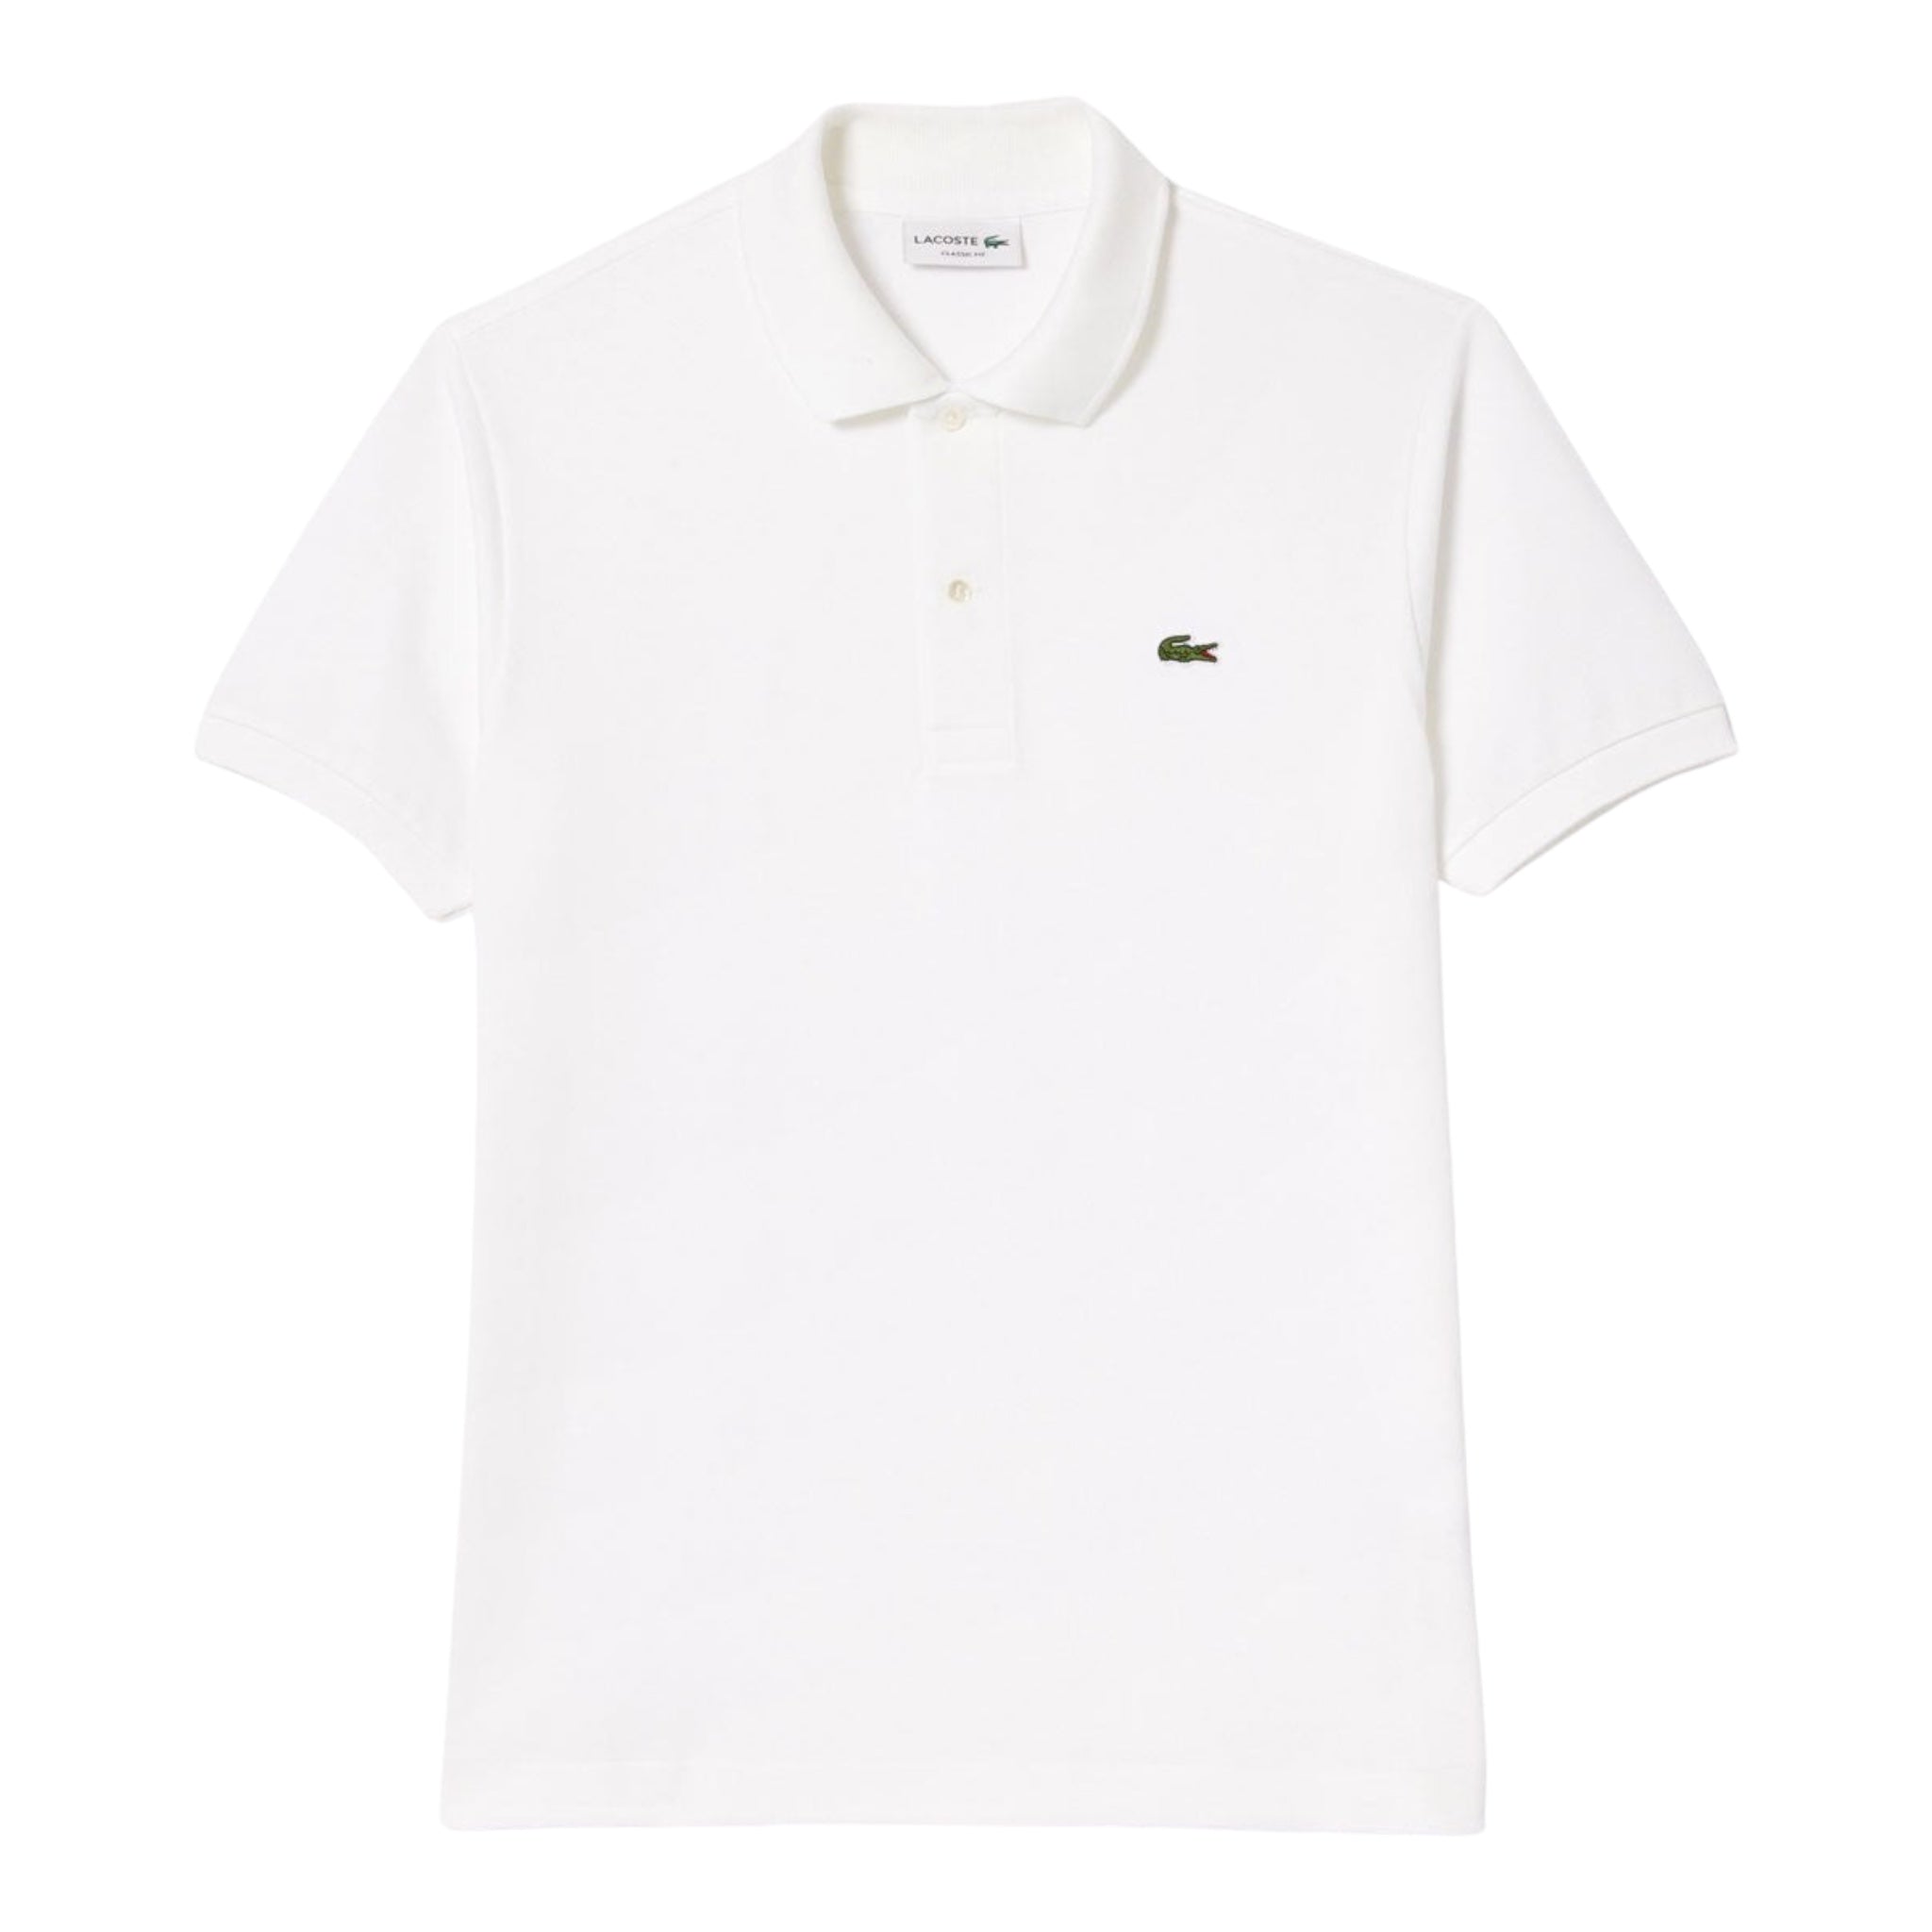 Polo Classic Fit Bianca L121200001 Lacoste